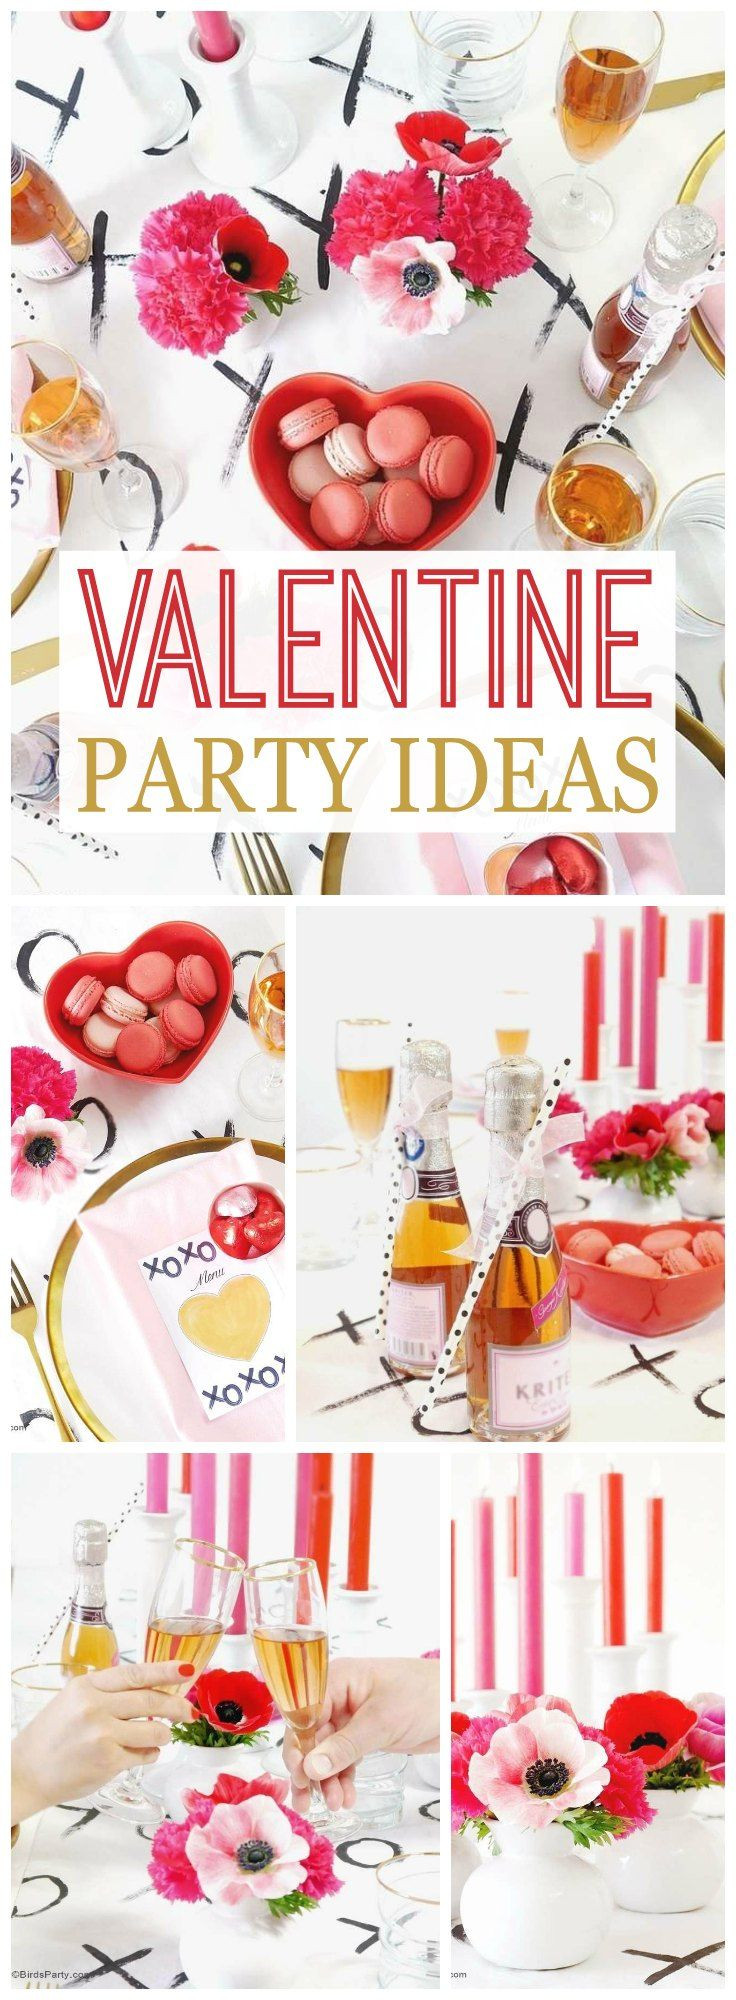 Valentines Dinner Party Ideas
 What a gorgeous Valentine s Day dinner party See more